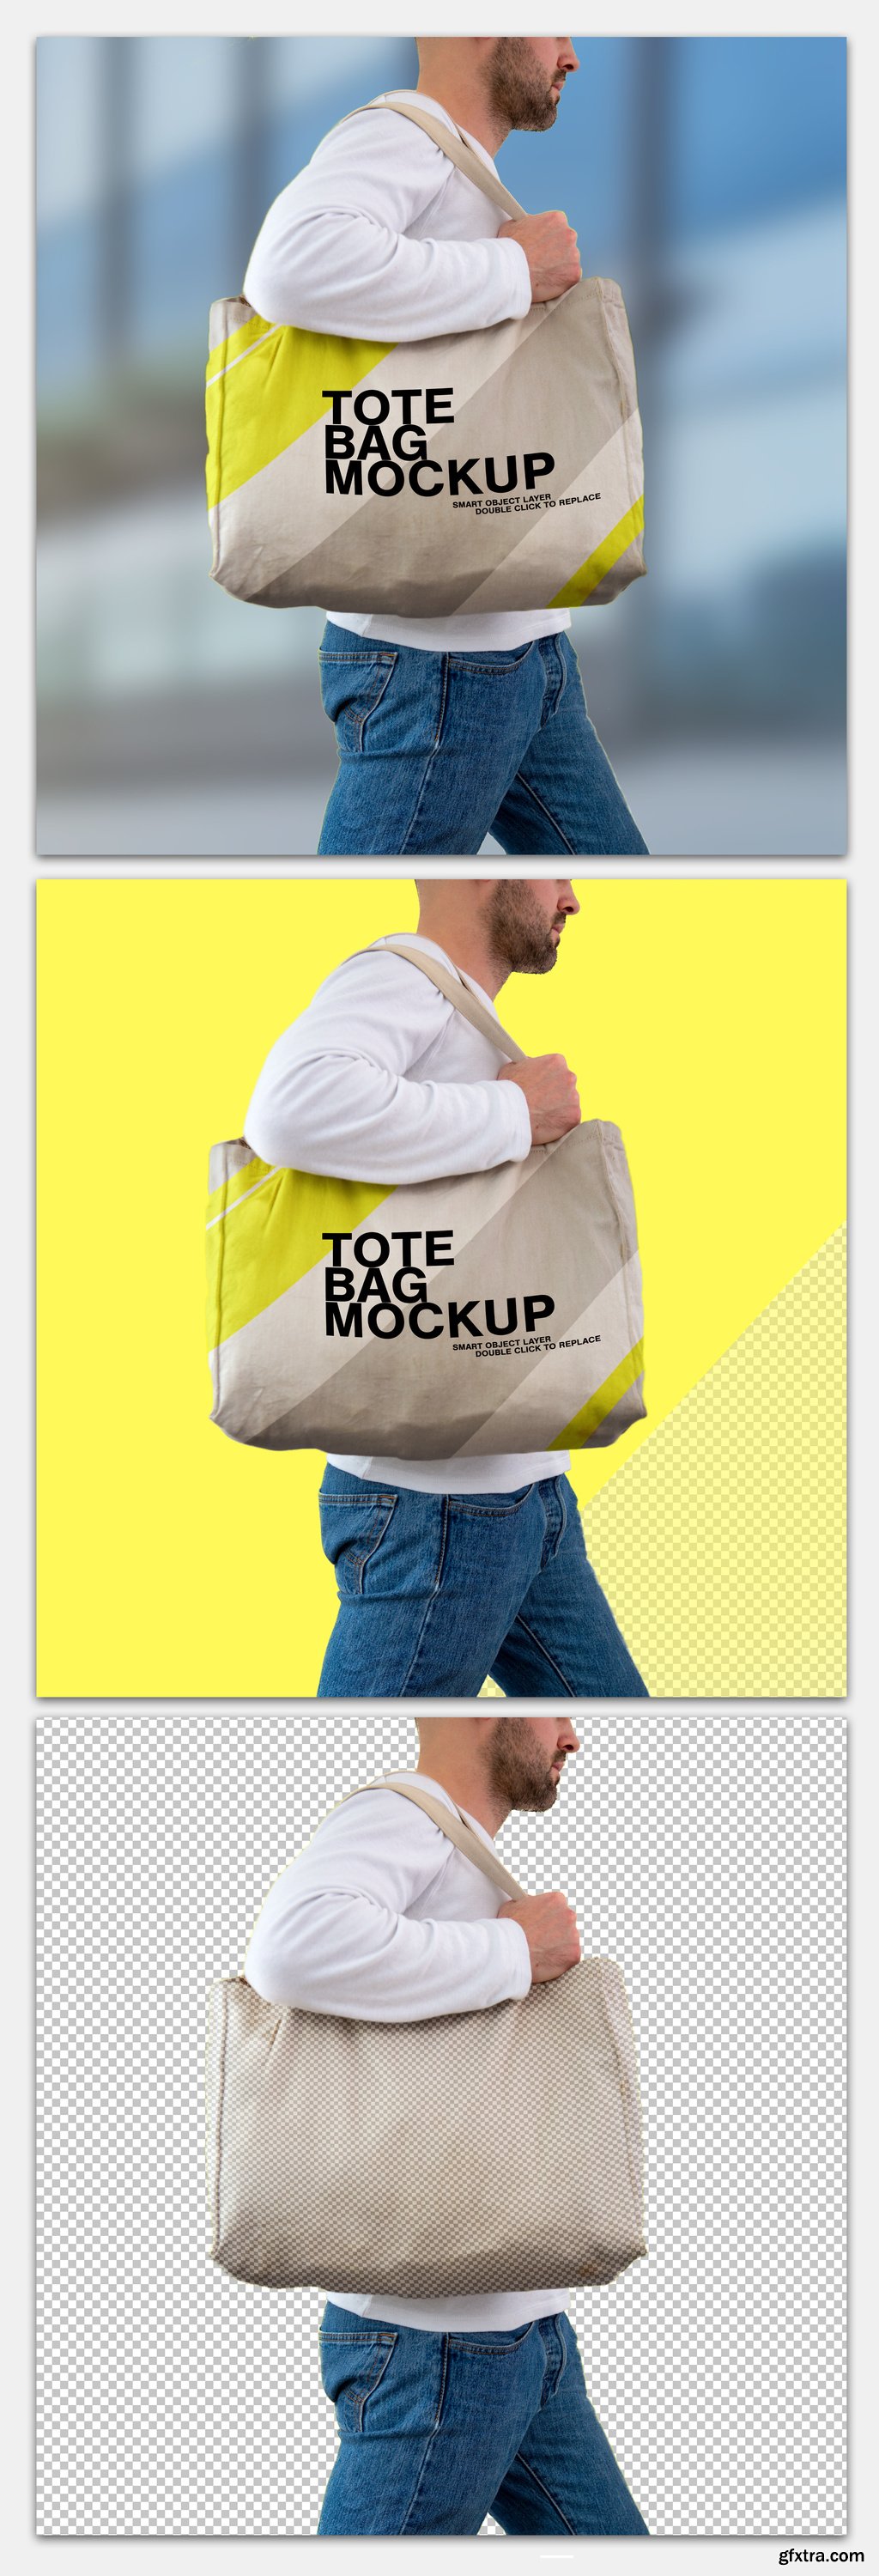 Mockup of Person Carrying a Tote Bag 358586287 » GFxtra